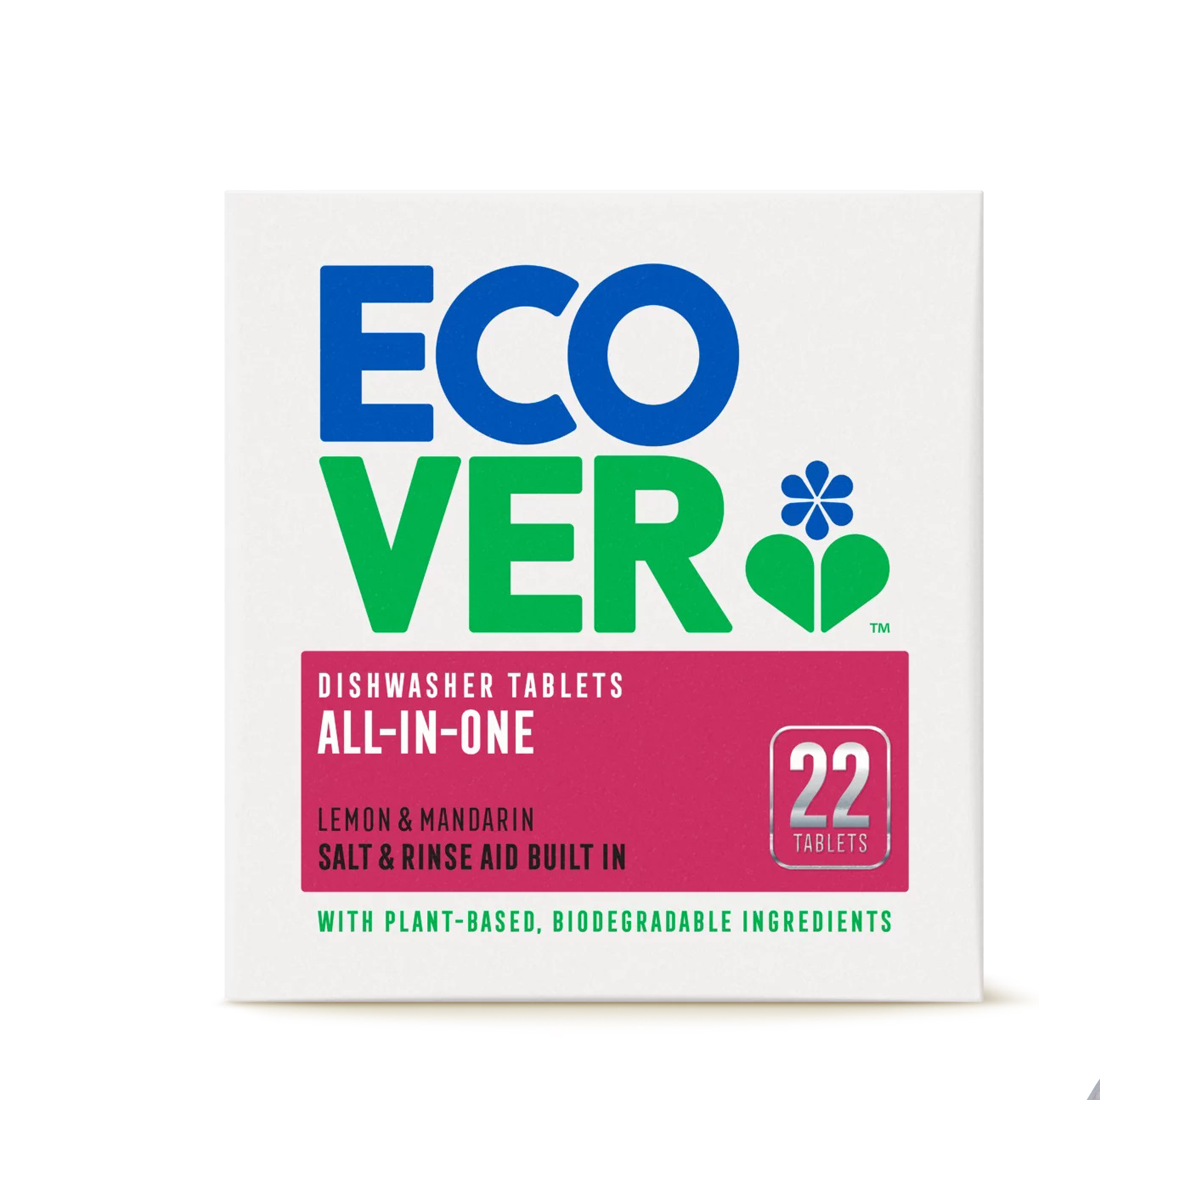 Ecover All In One Dishwasher Tablets